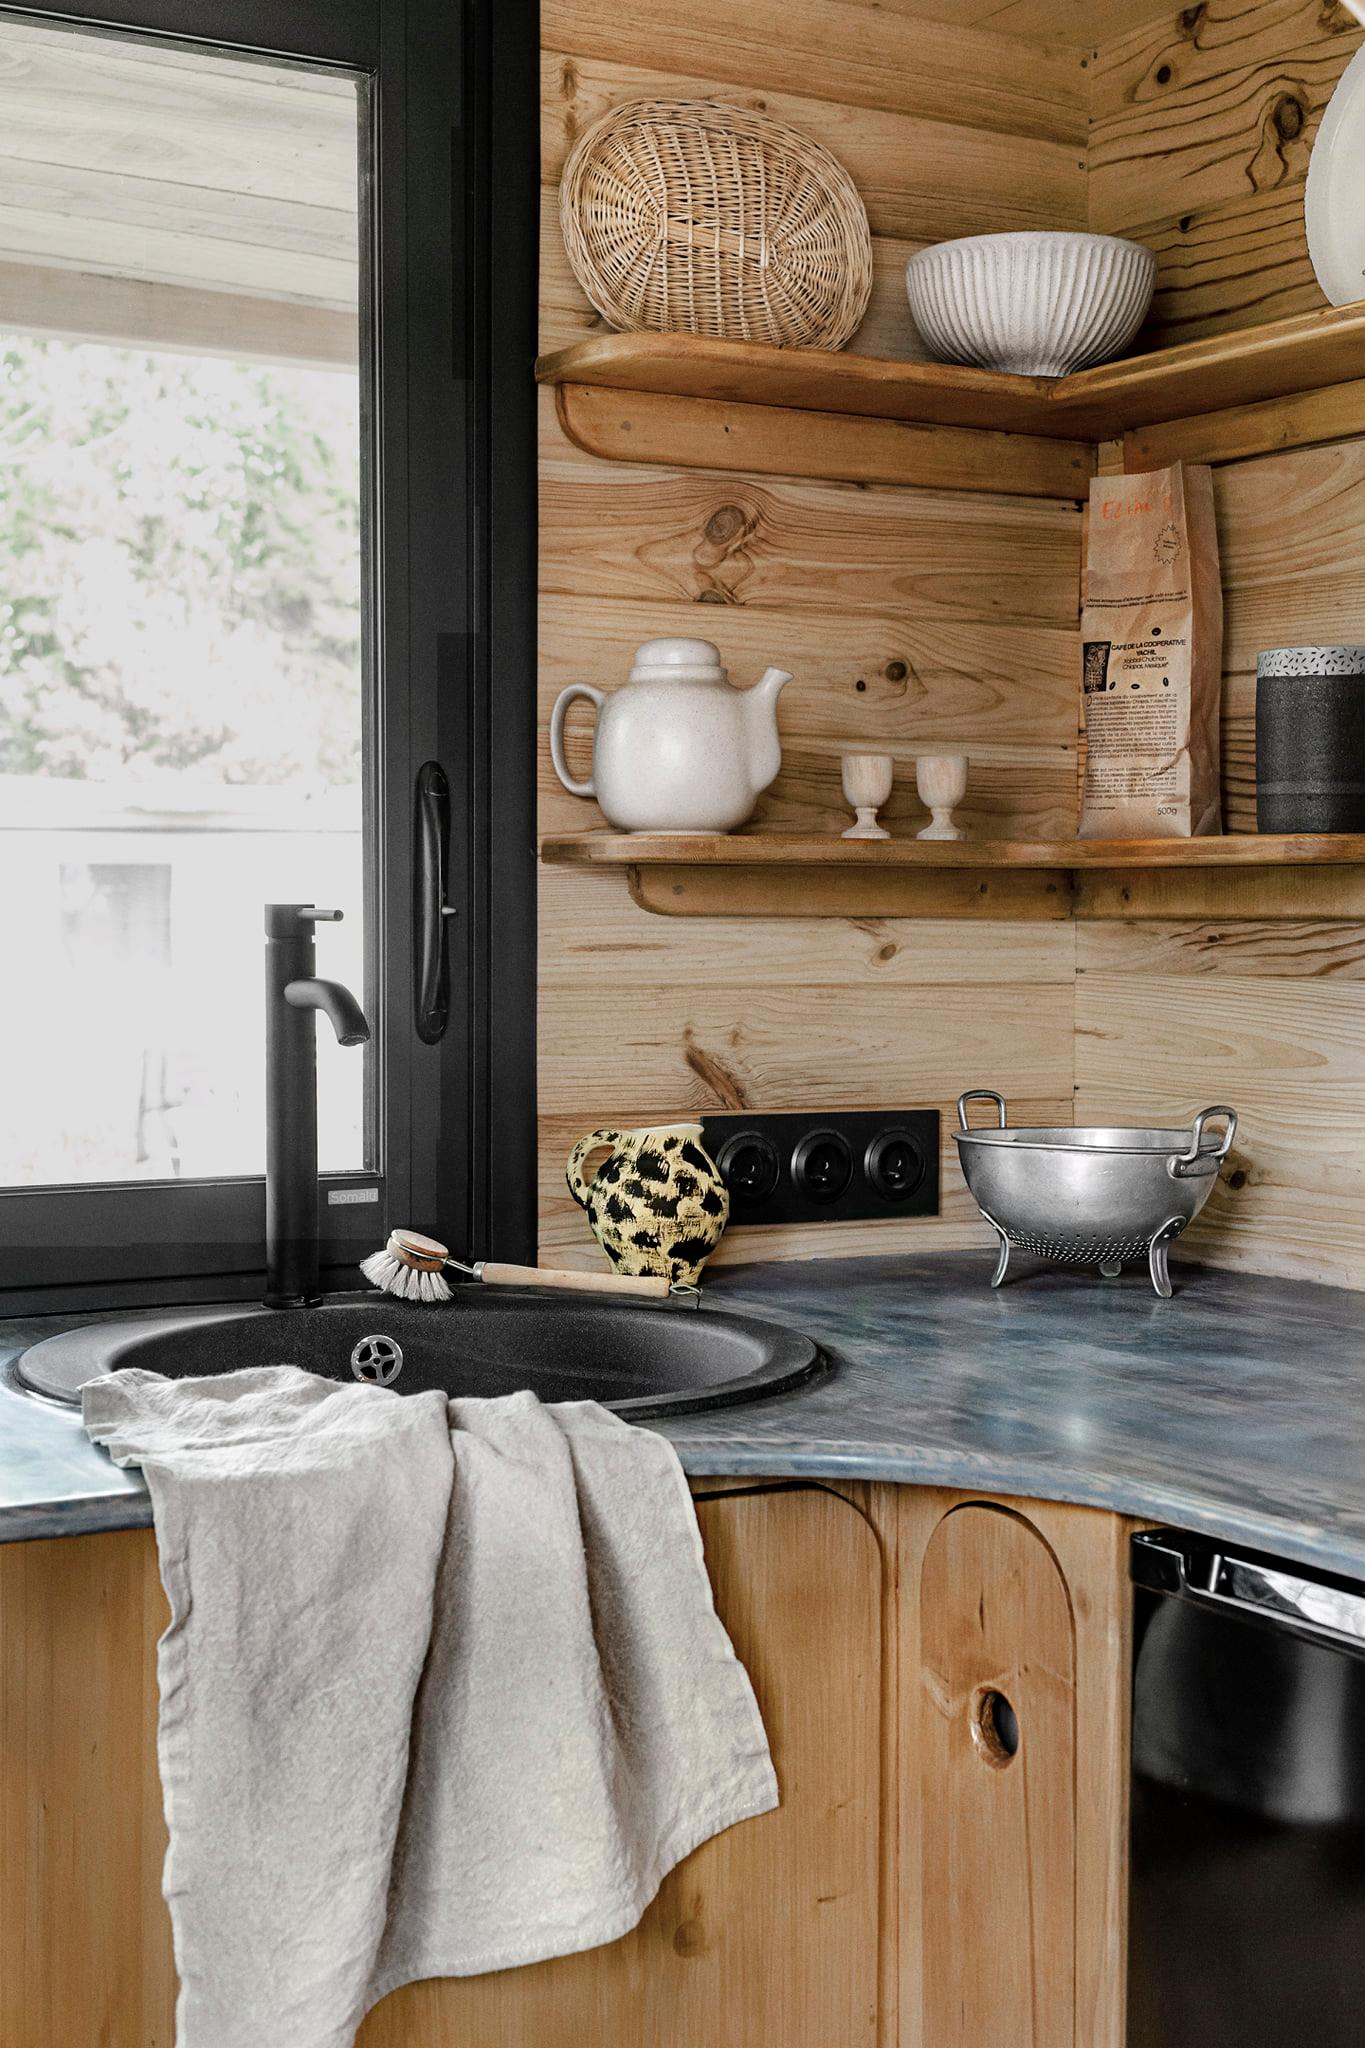 Kitchen Sink and Shelves - P'tit Nid Mobile Tiny House